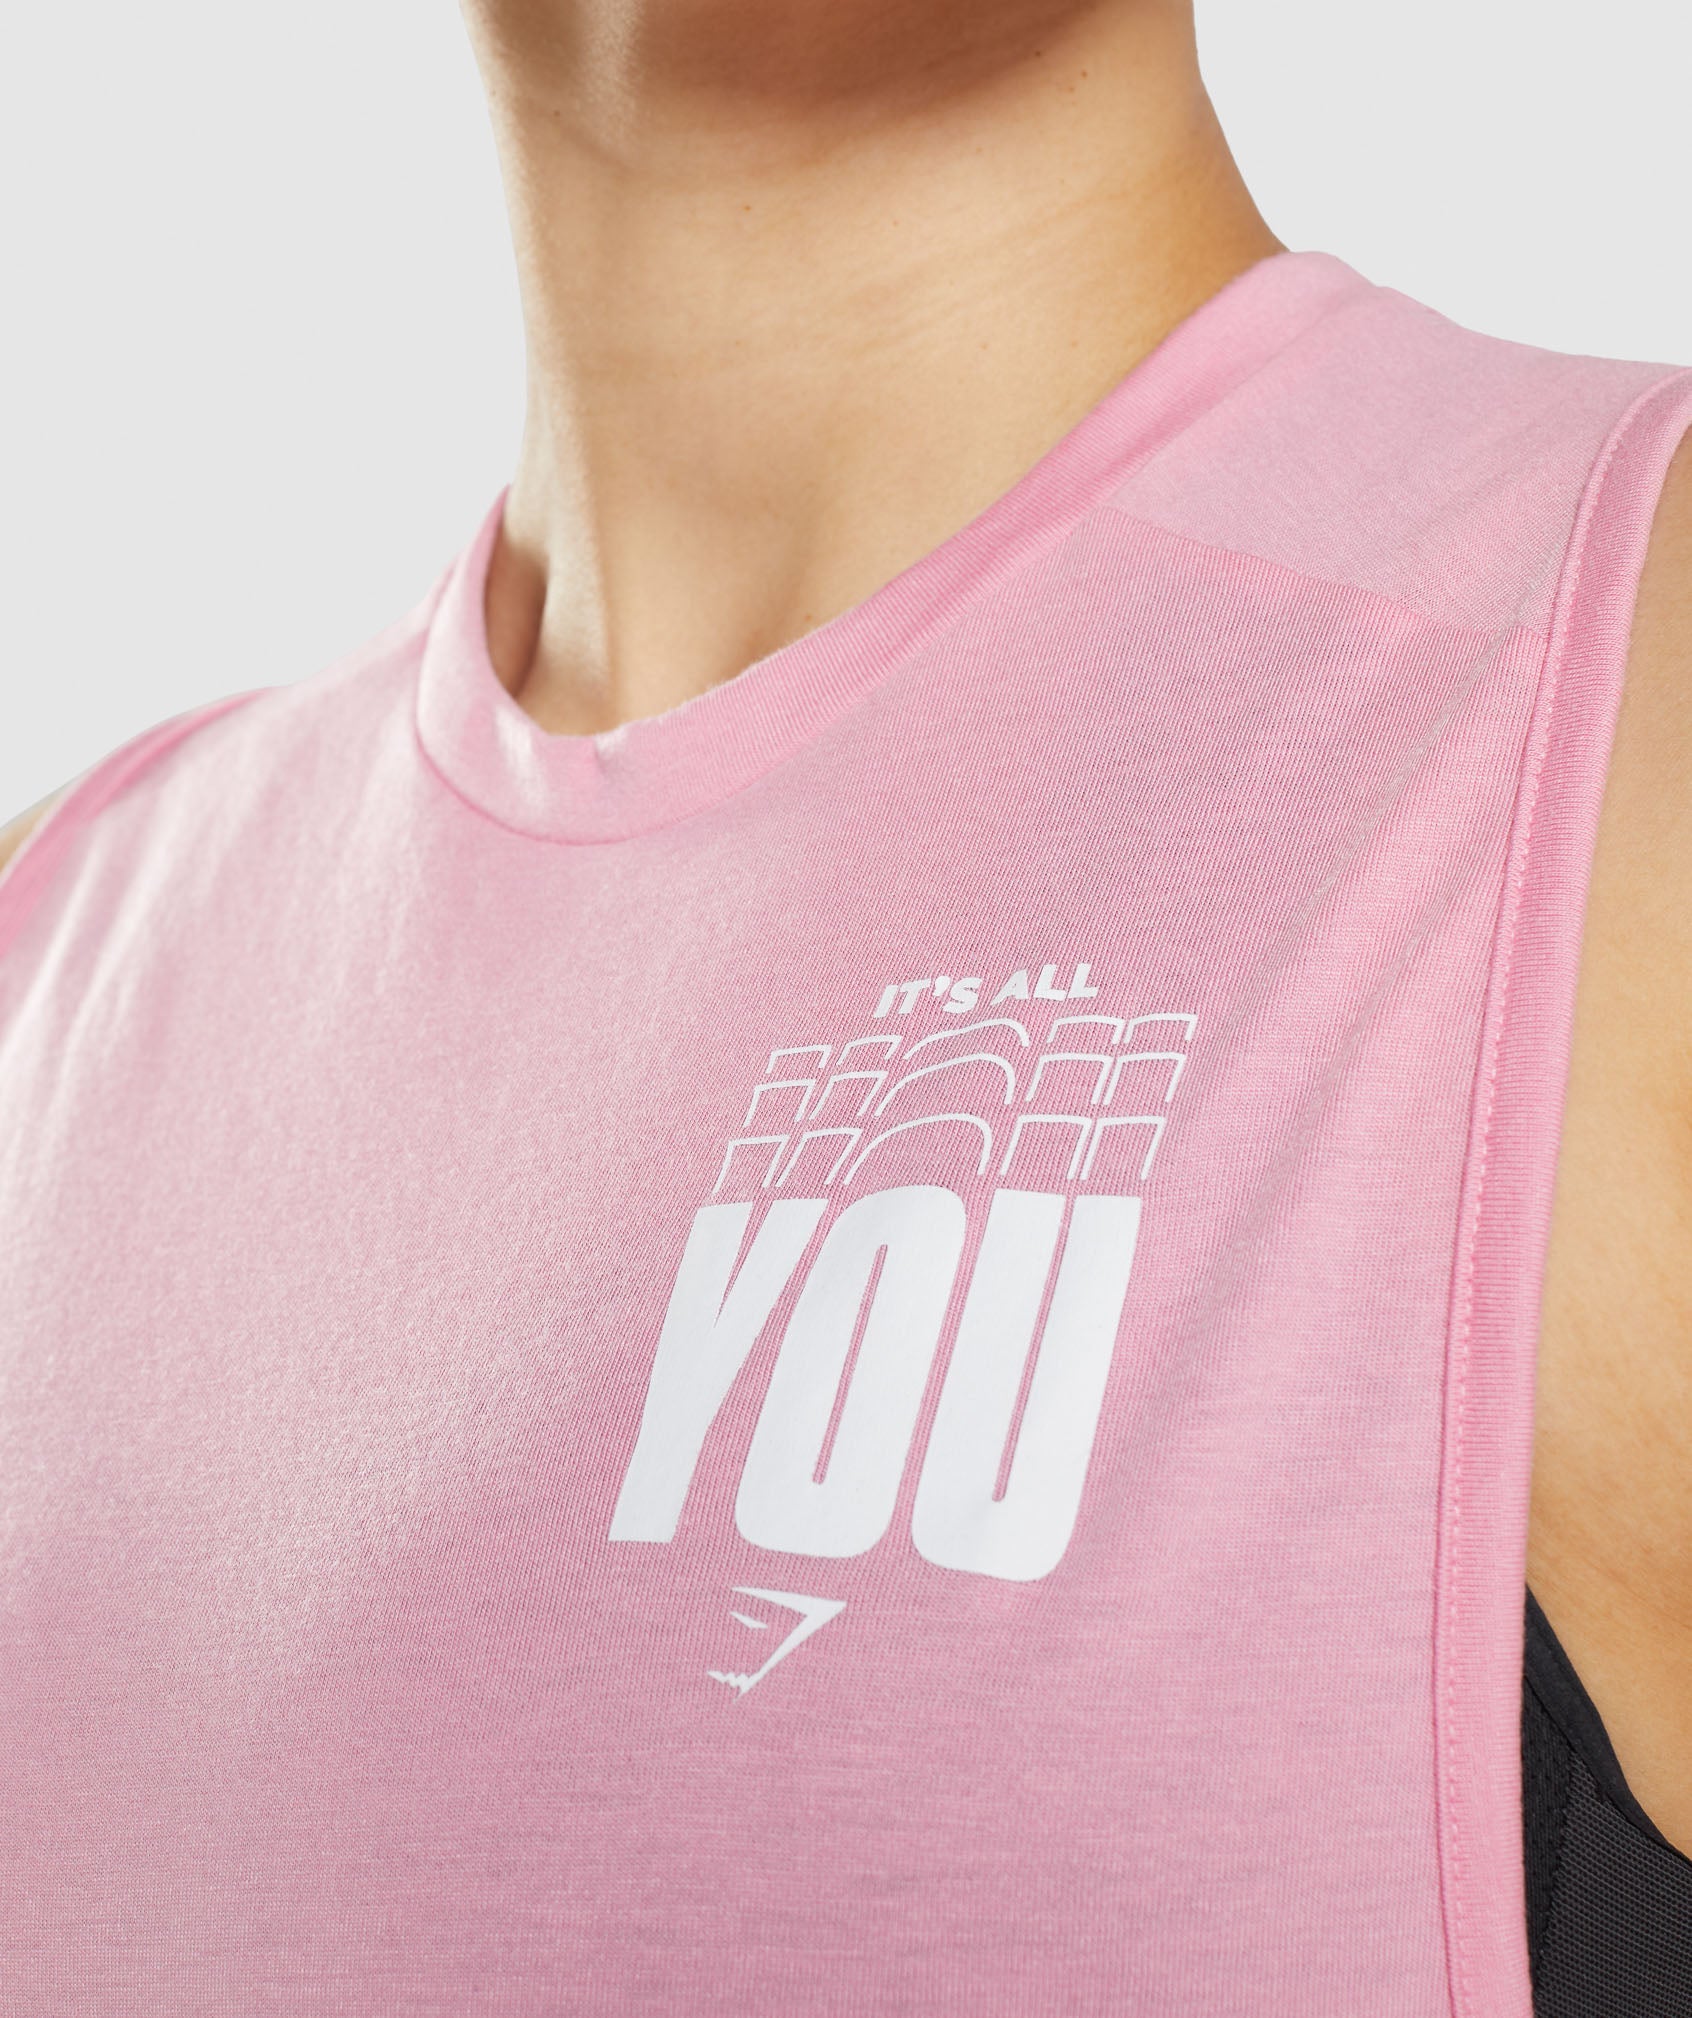 Its All You Drop Arm Tank in Sorbet Pink - view 6